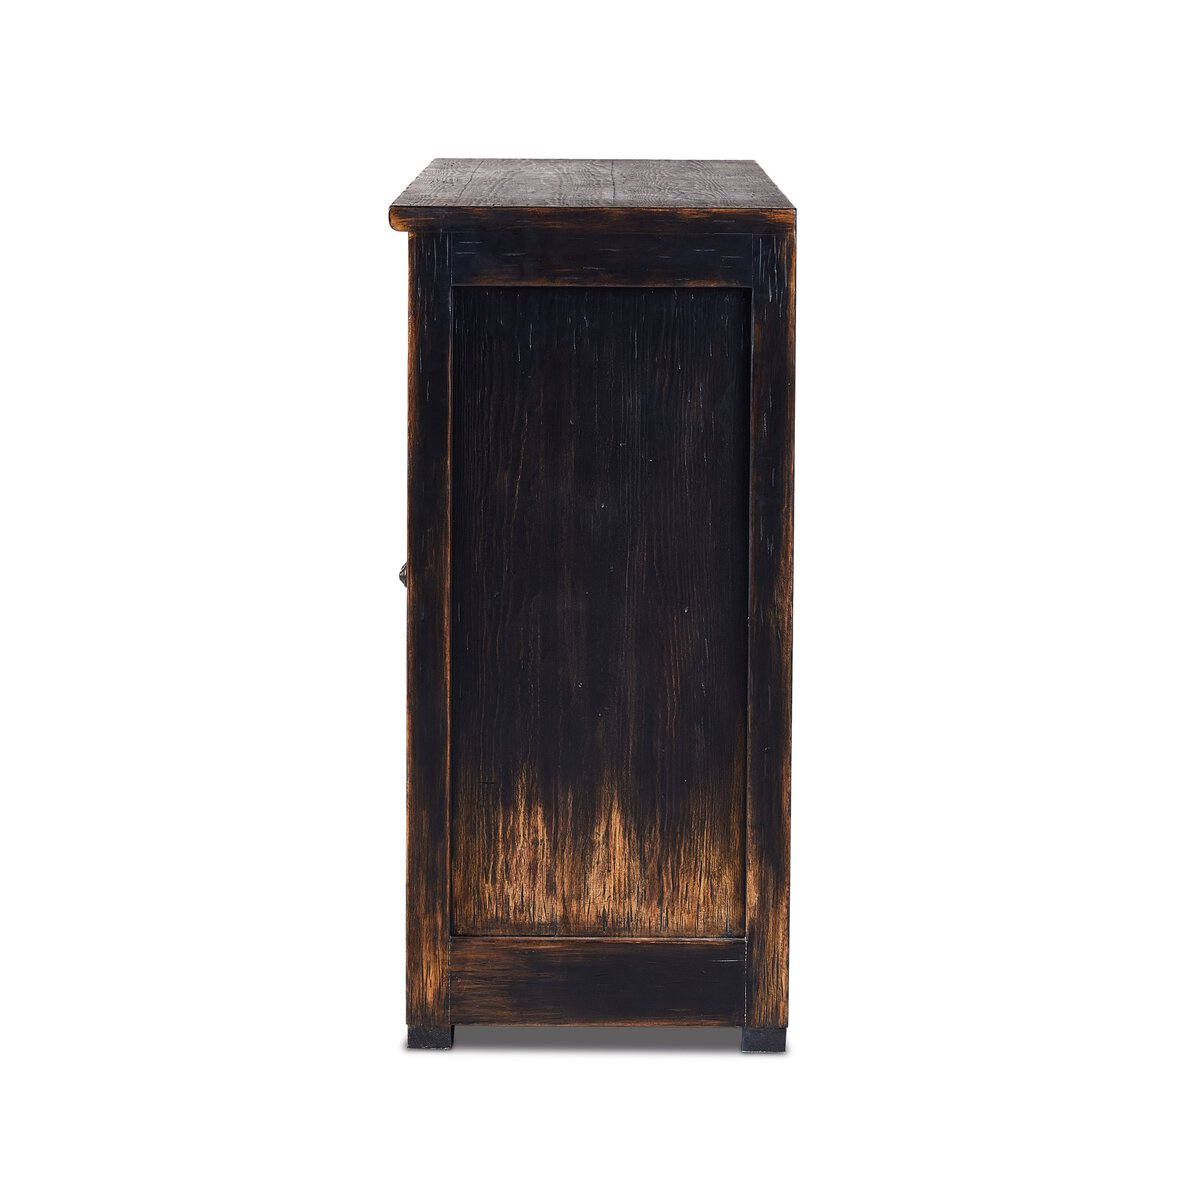 It Takes An Hour Sideboard 63" Distressed Black